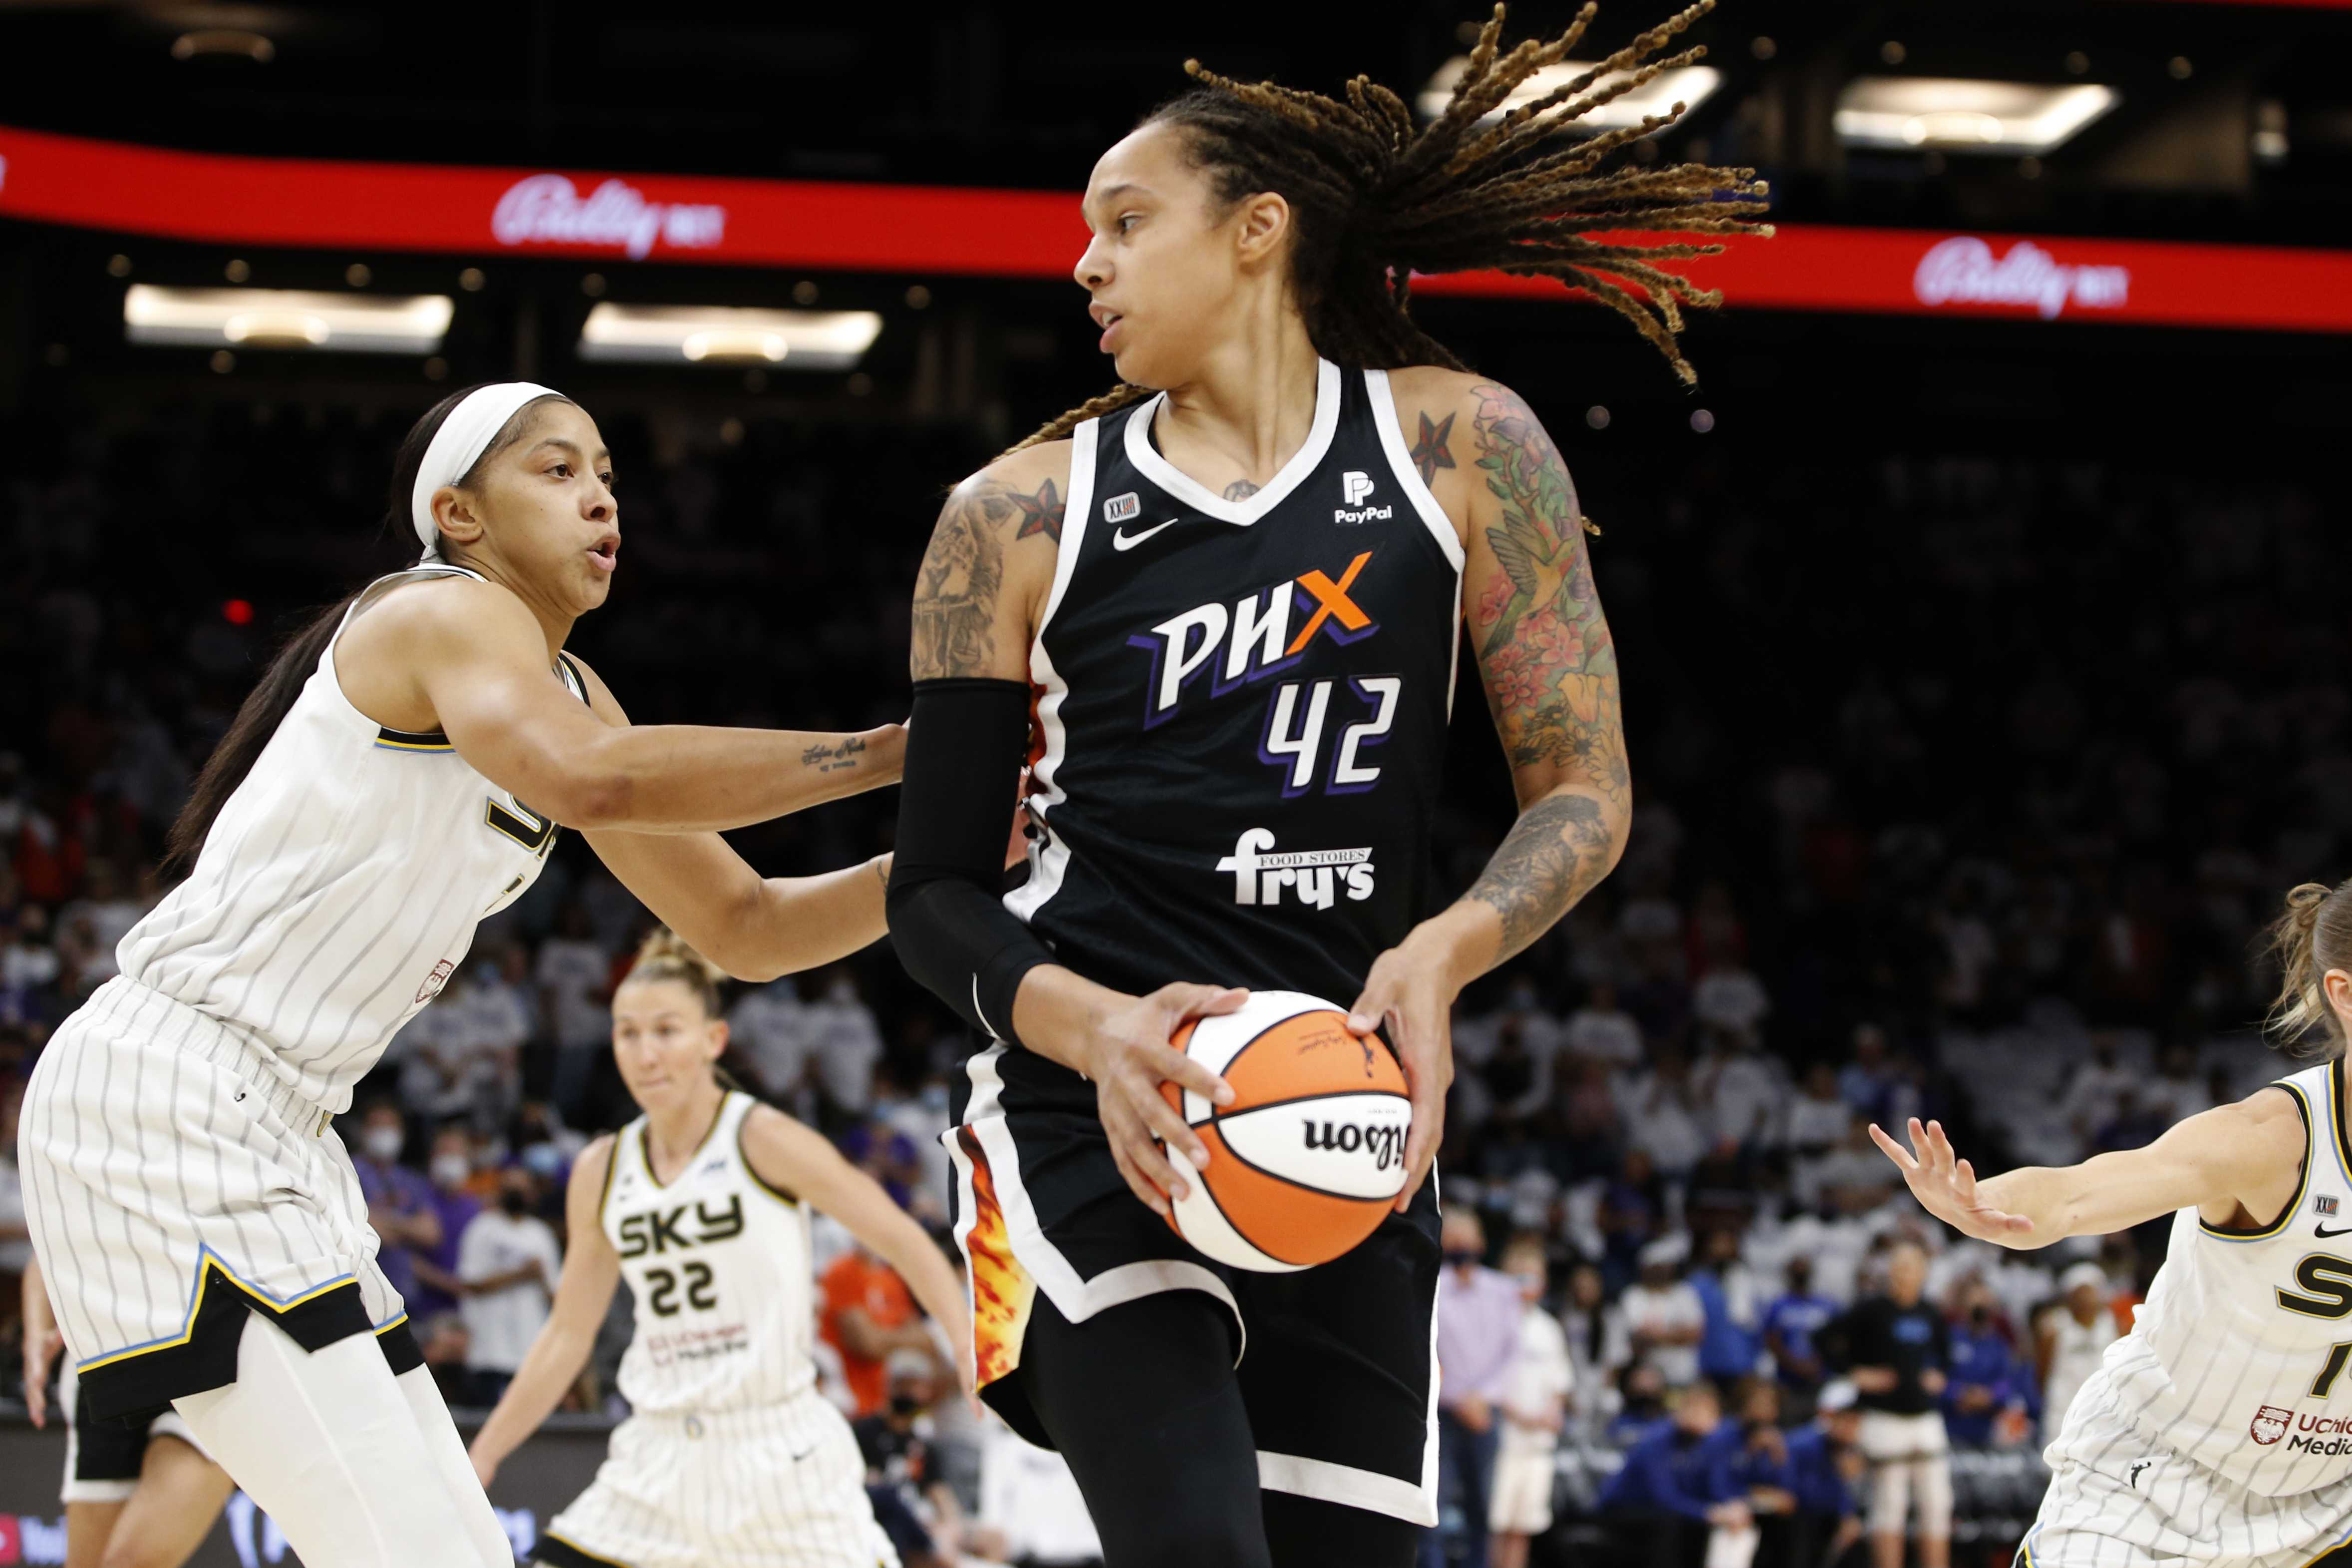 US Diplomat Describes Moments With Brittney Griner on Homebound